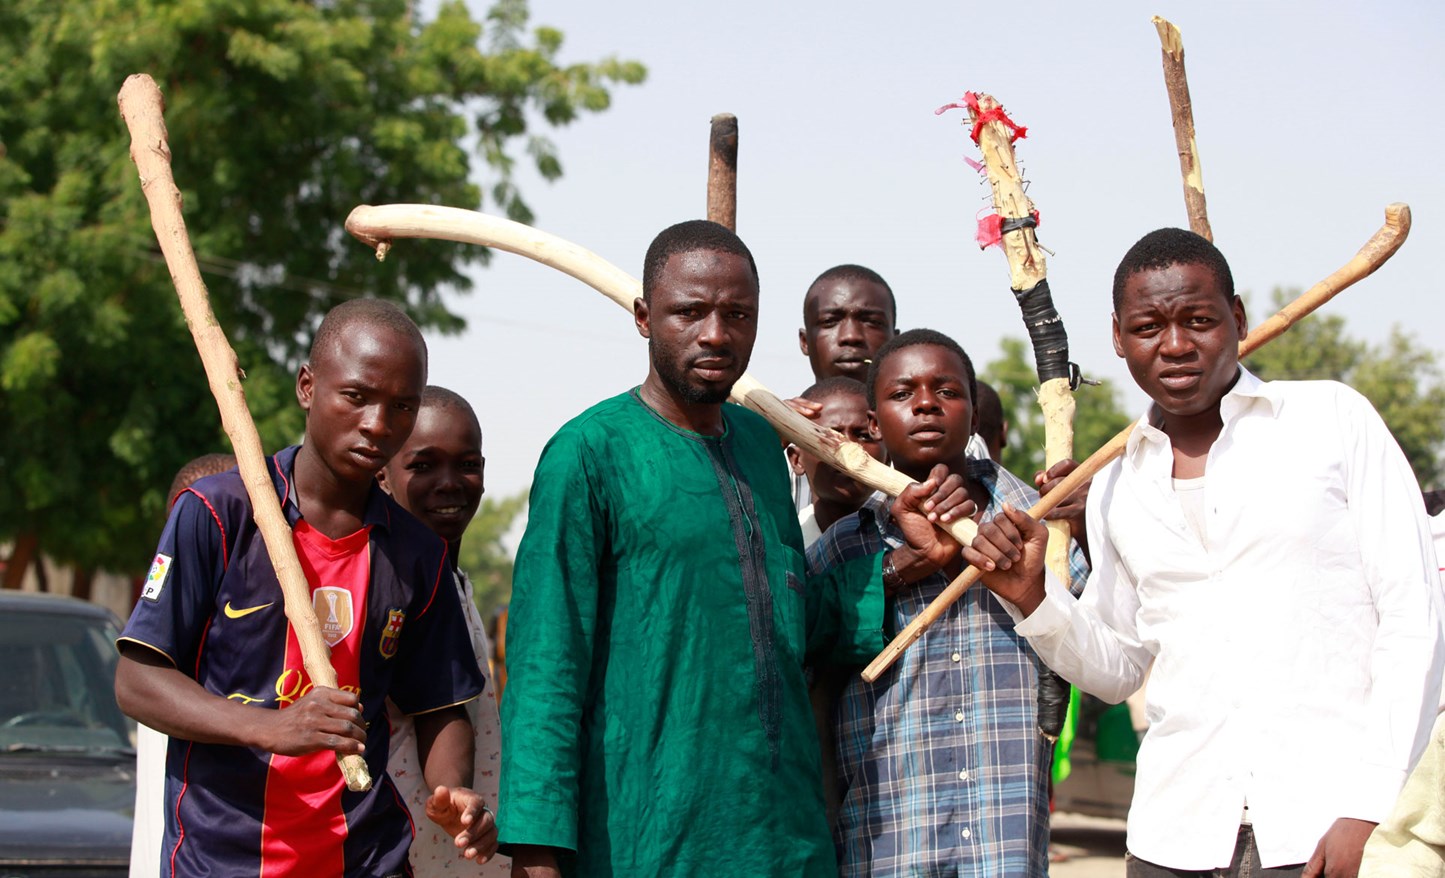 A group of men holding up wooden sticks.